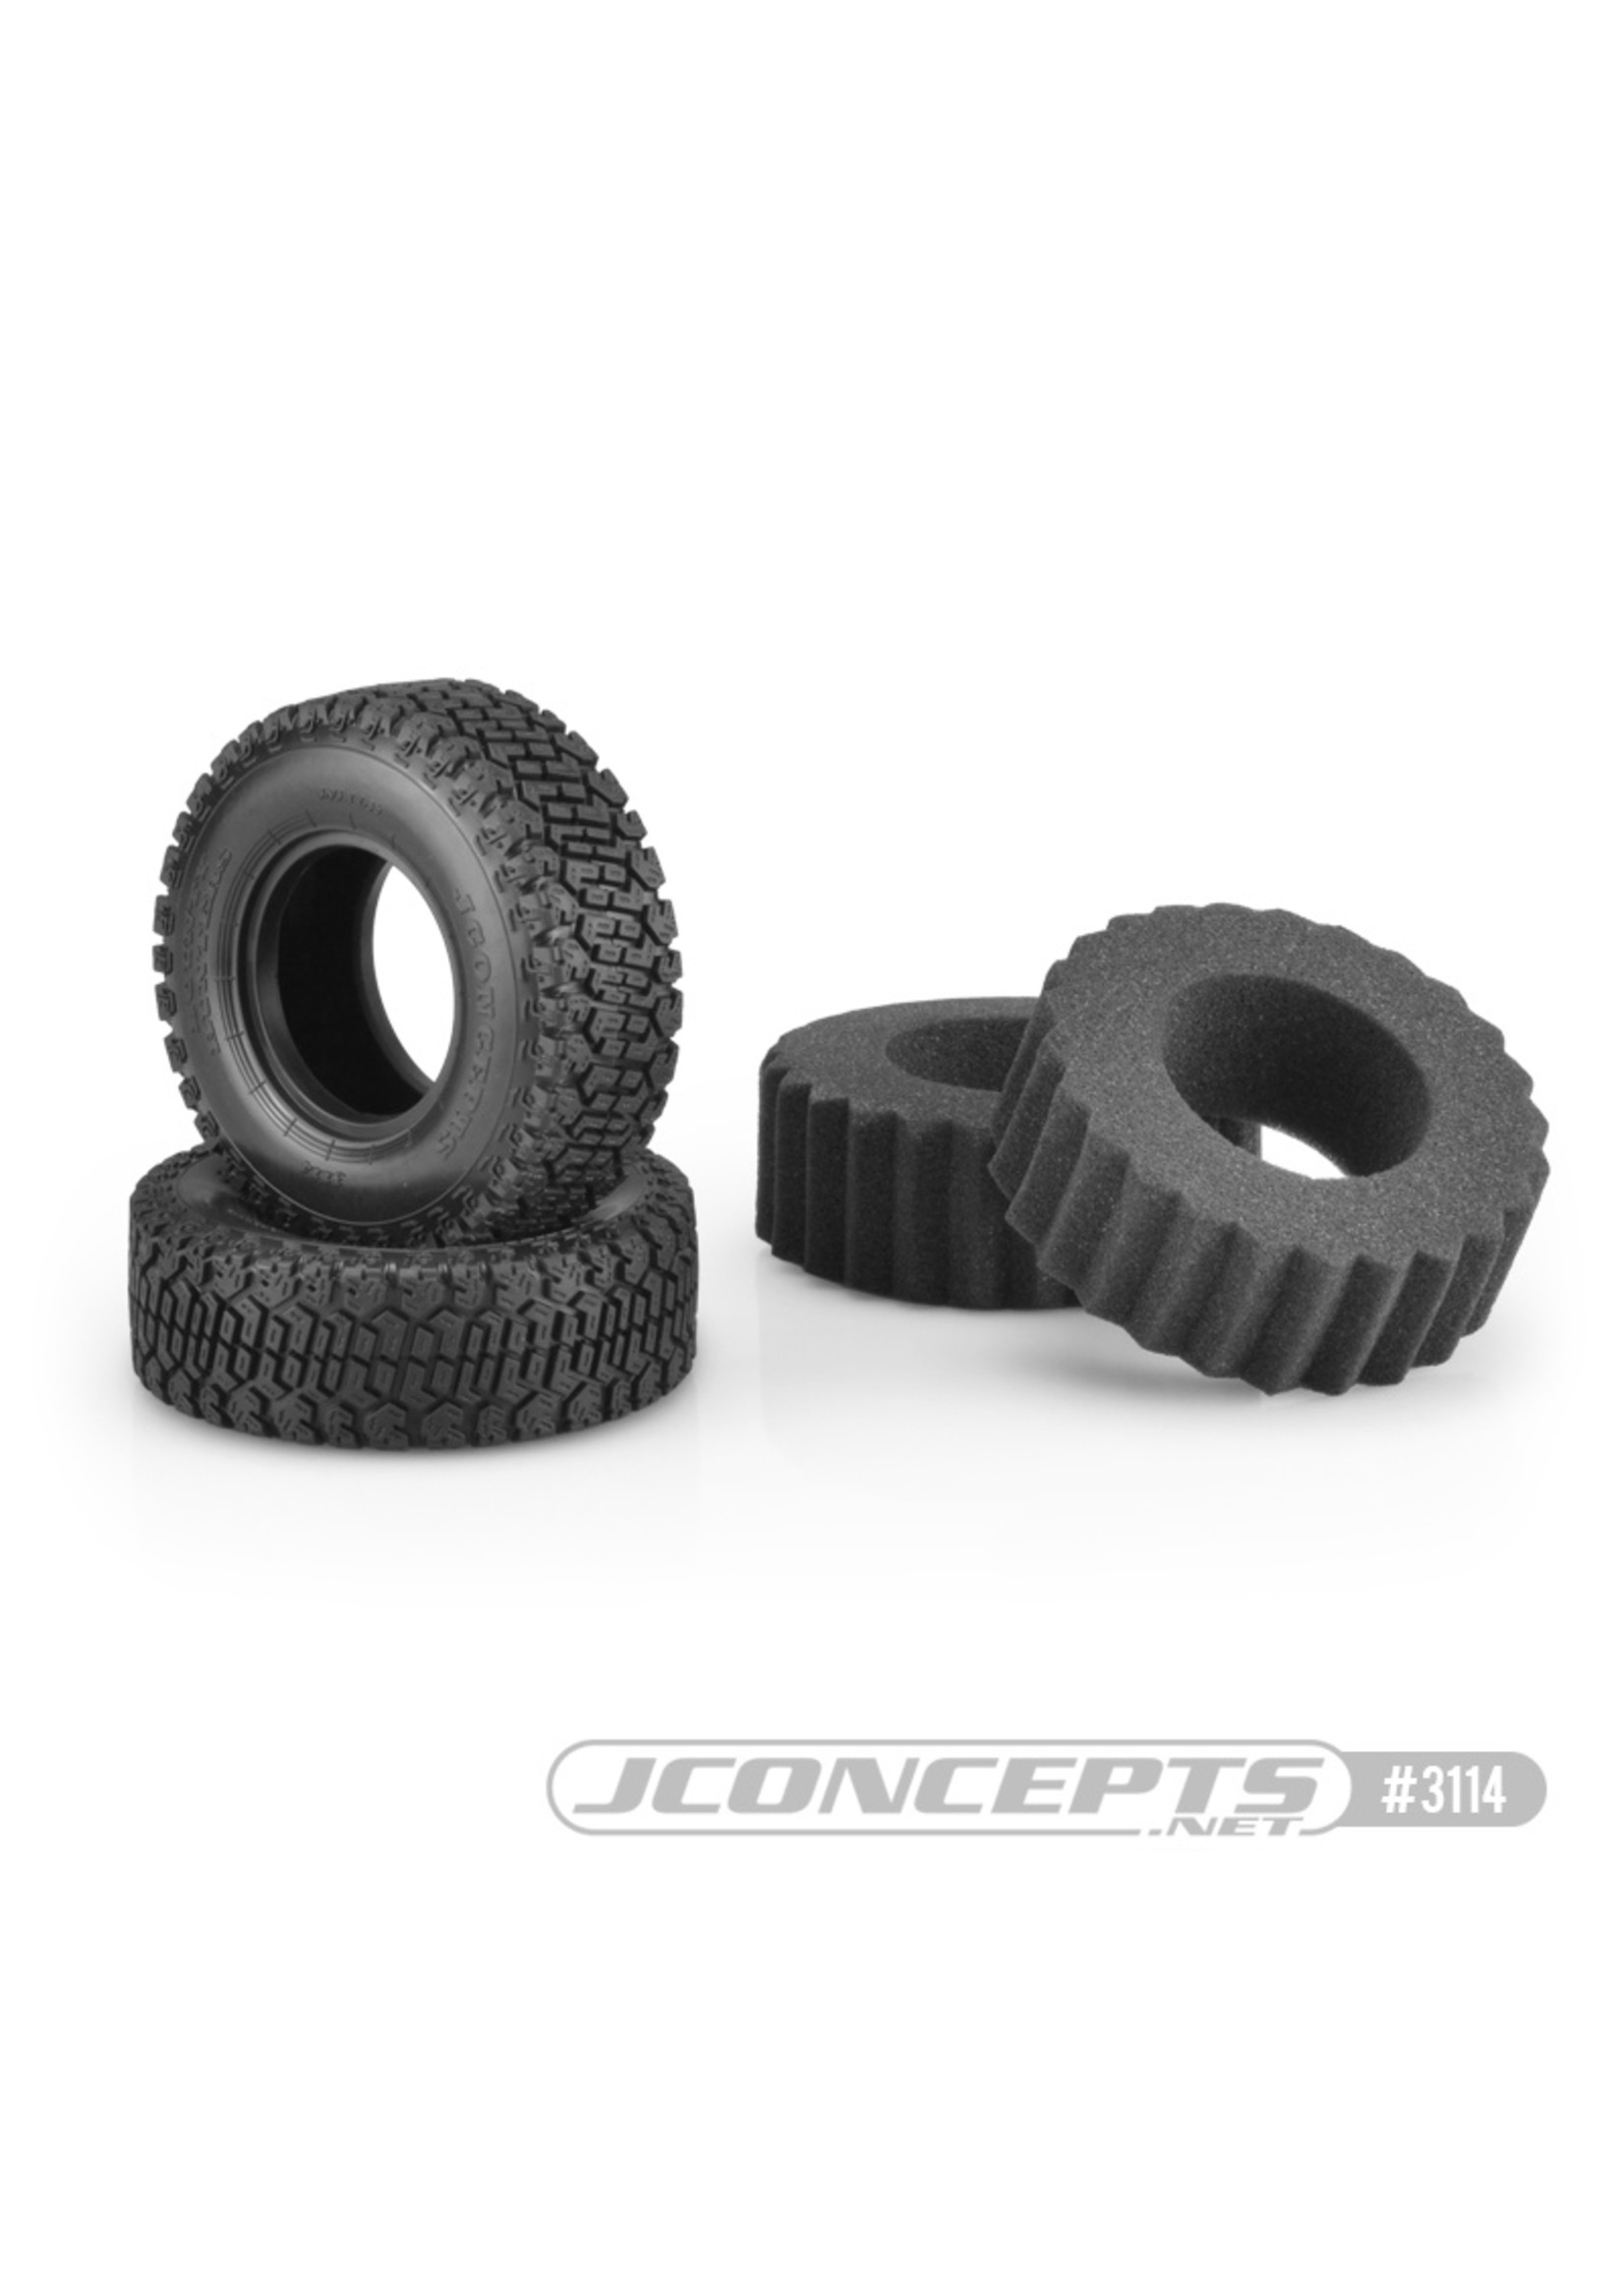 JConcepts JCO311402 - Bounty Hunters, Green Compound, 1.9" (3.93" O.D.) Scale Country Tires